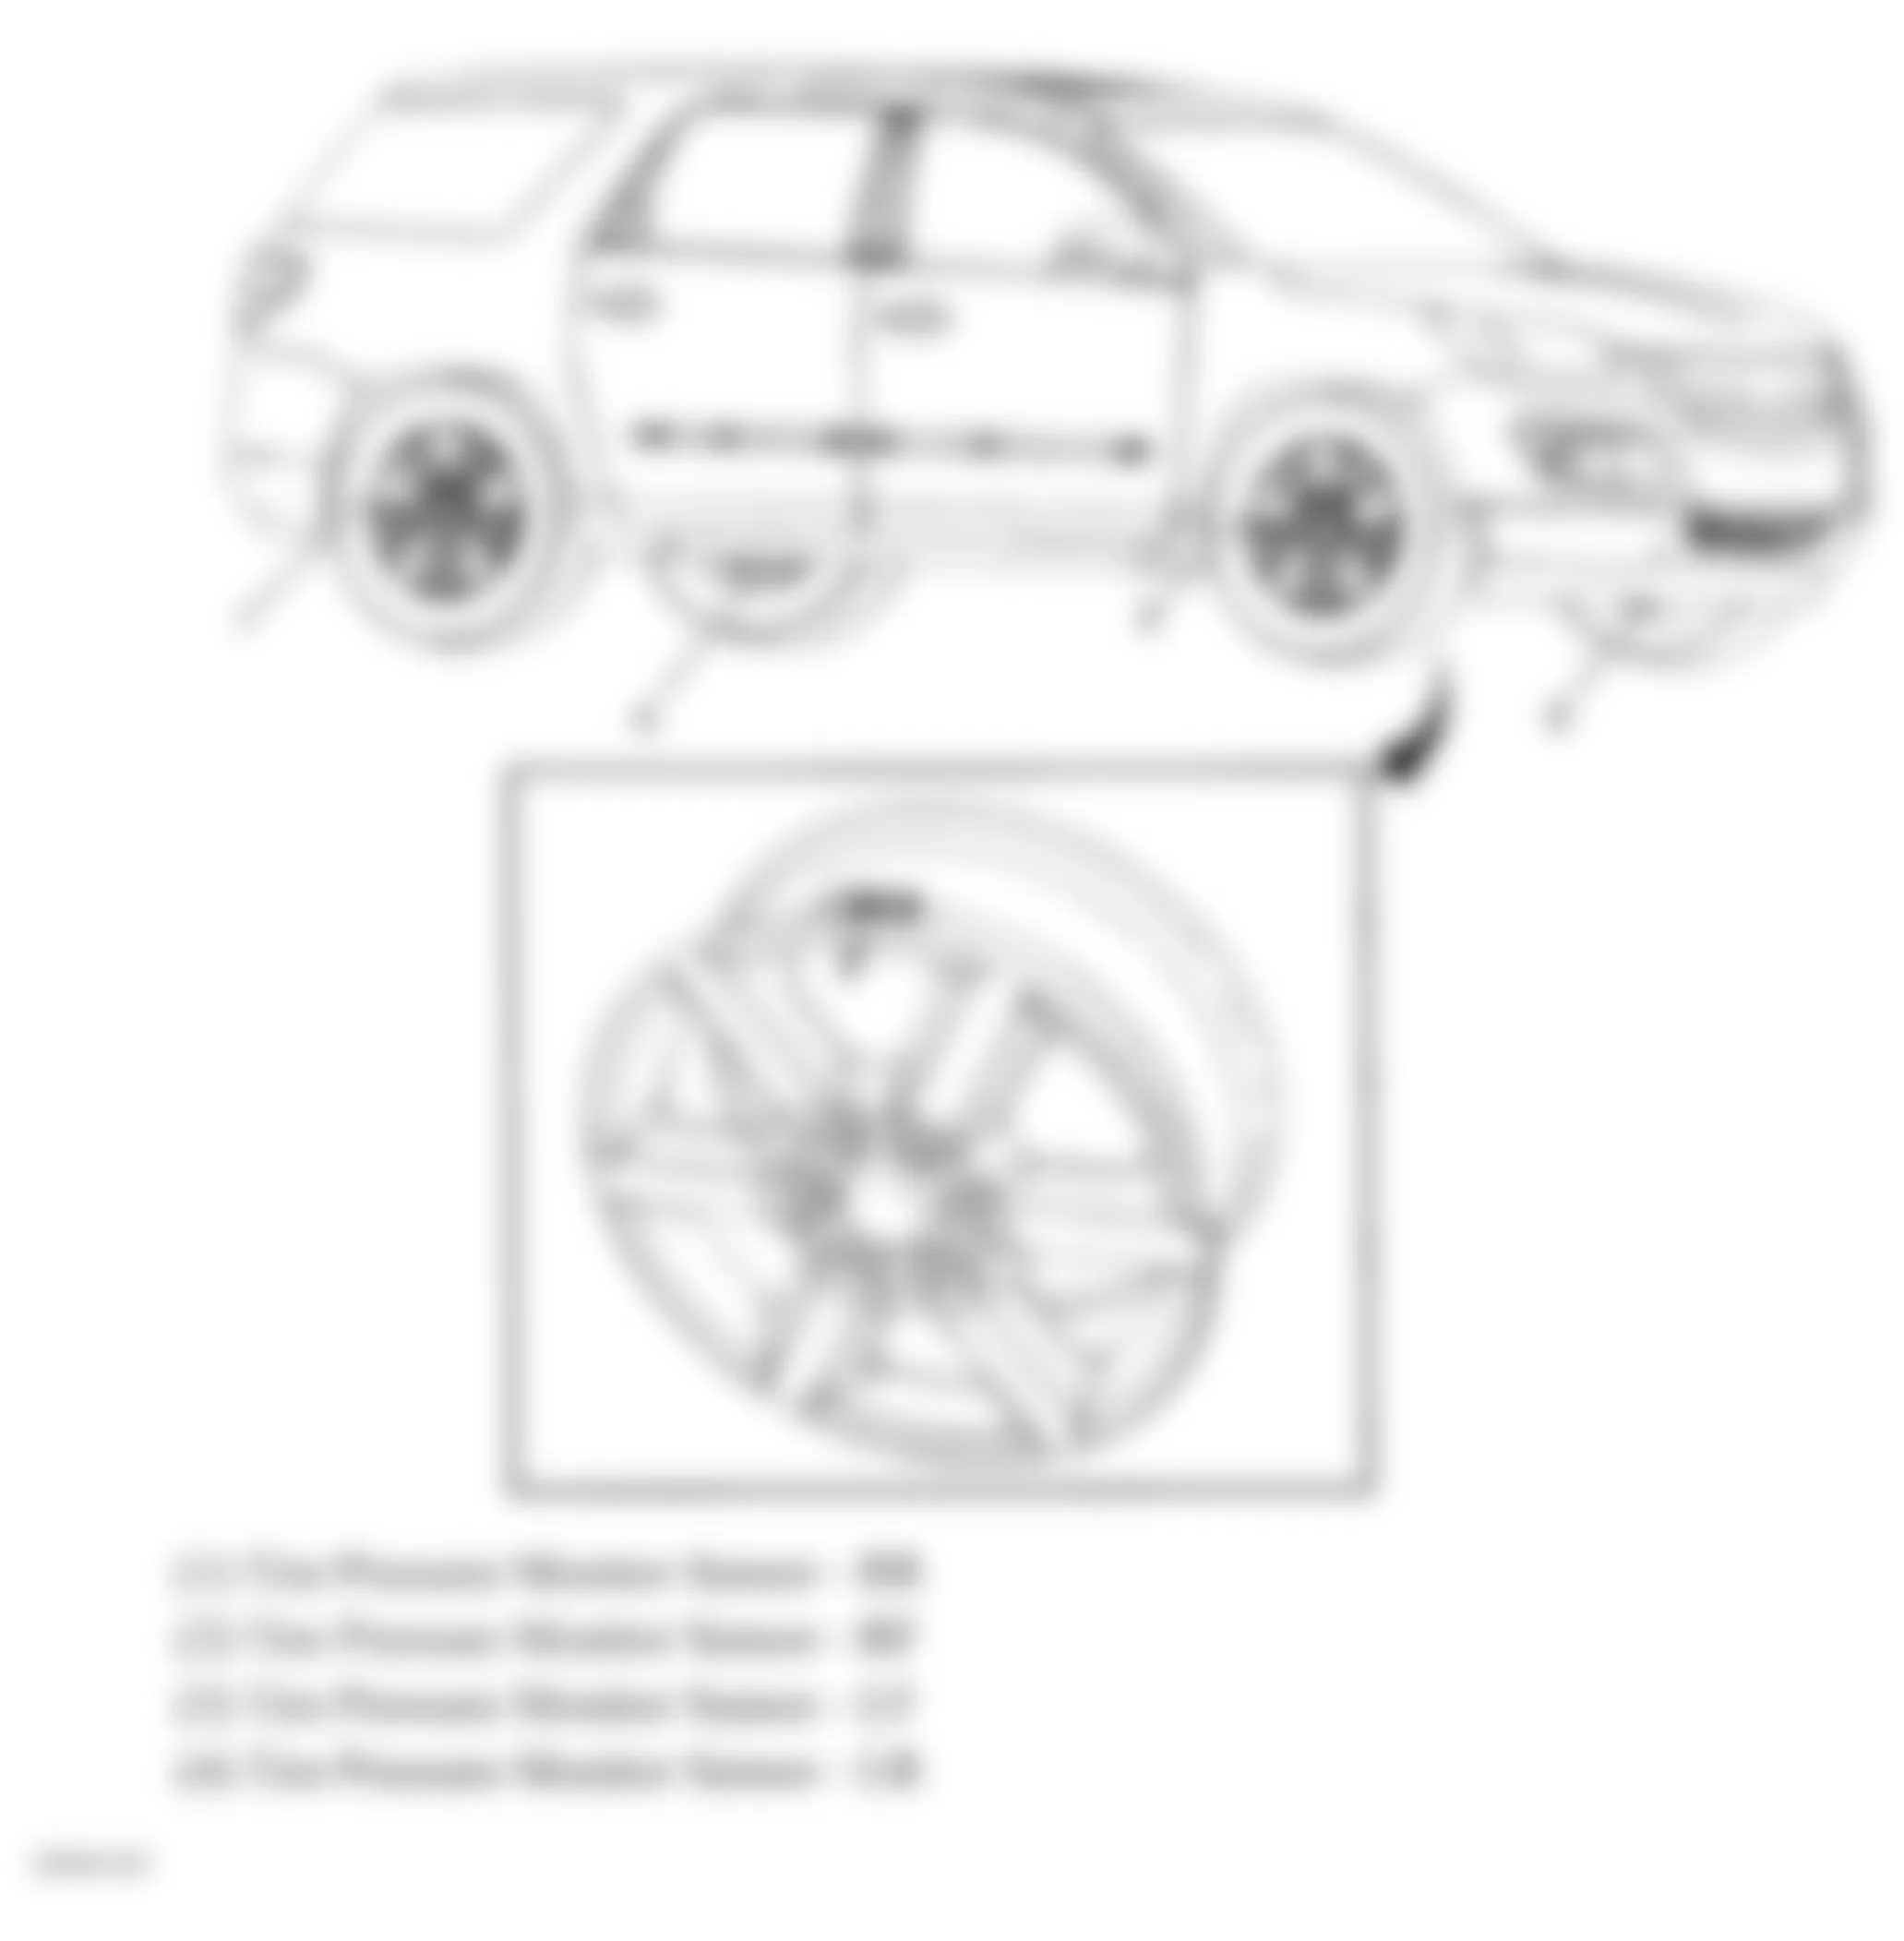 Buick Enclave CXL 2008 - Component Locations -  Vehicle Tire Overview